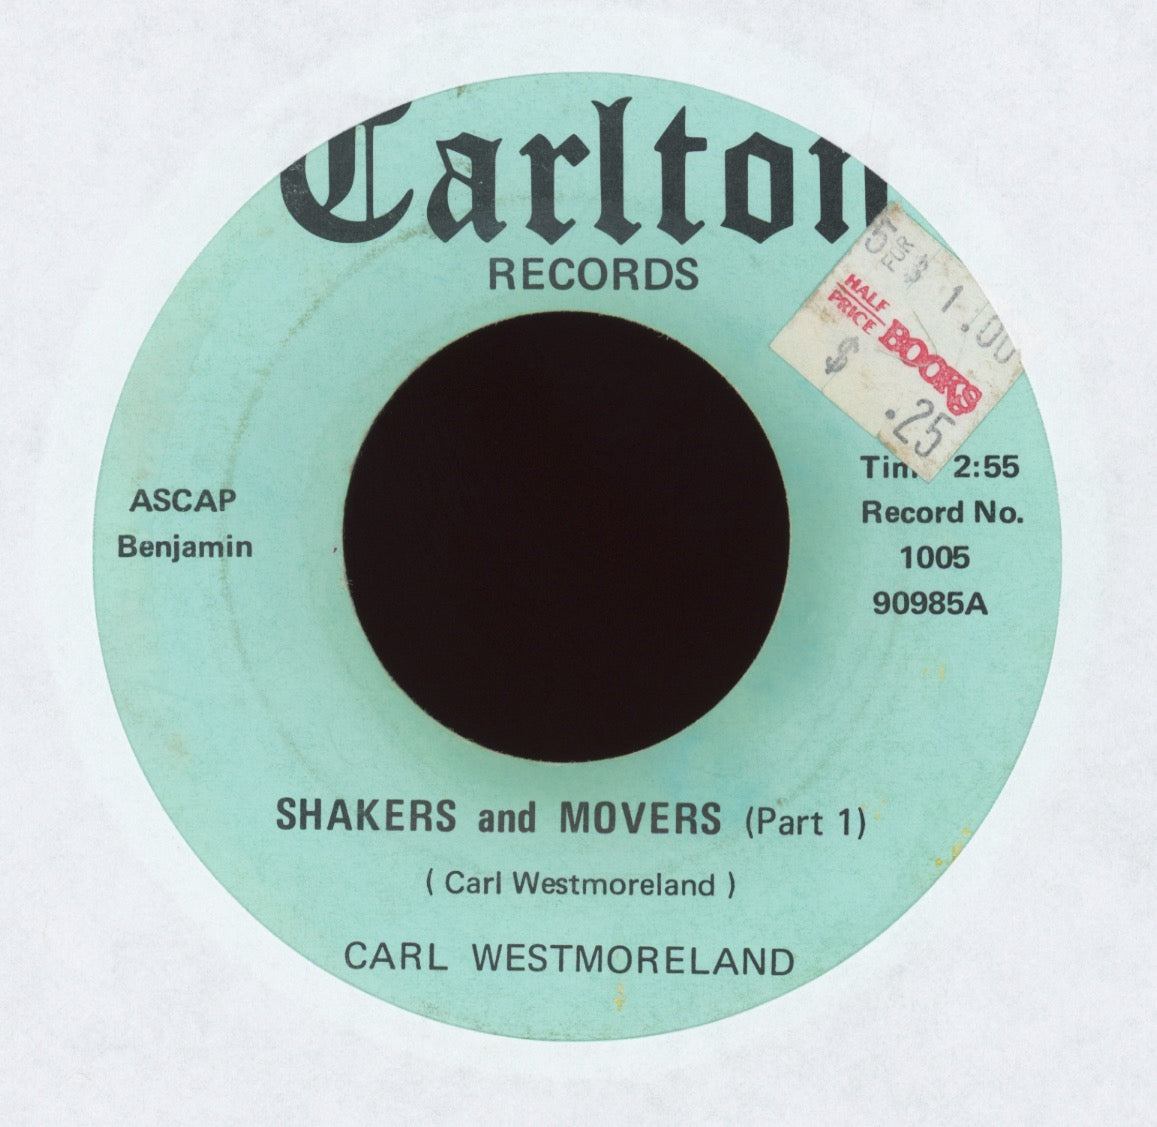 Carl Westmoreland - Shakers and Movers on Carlton